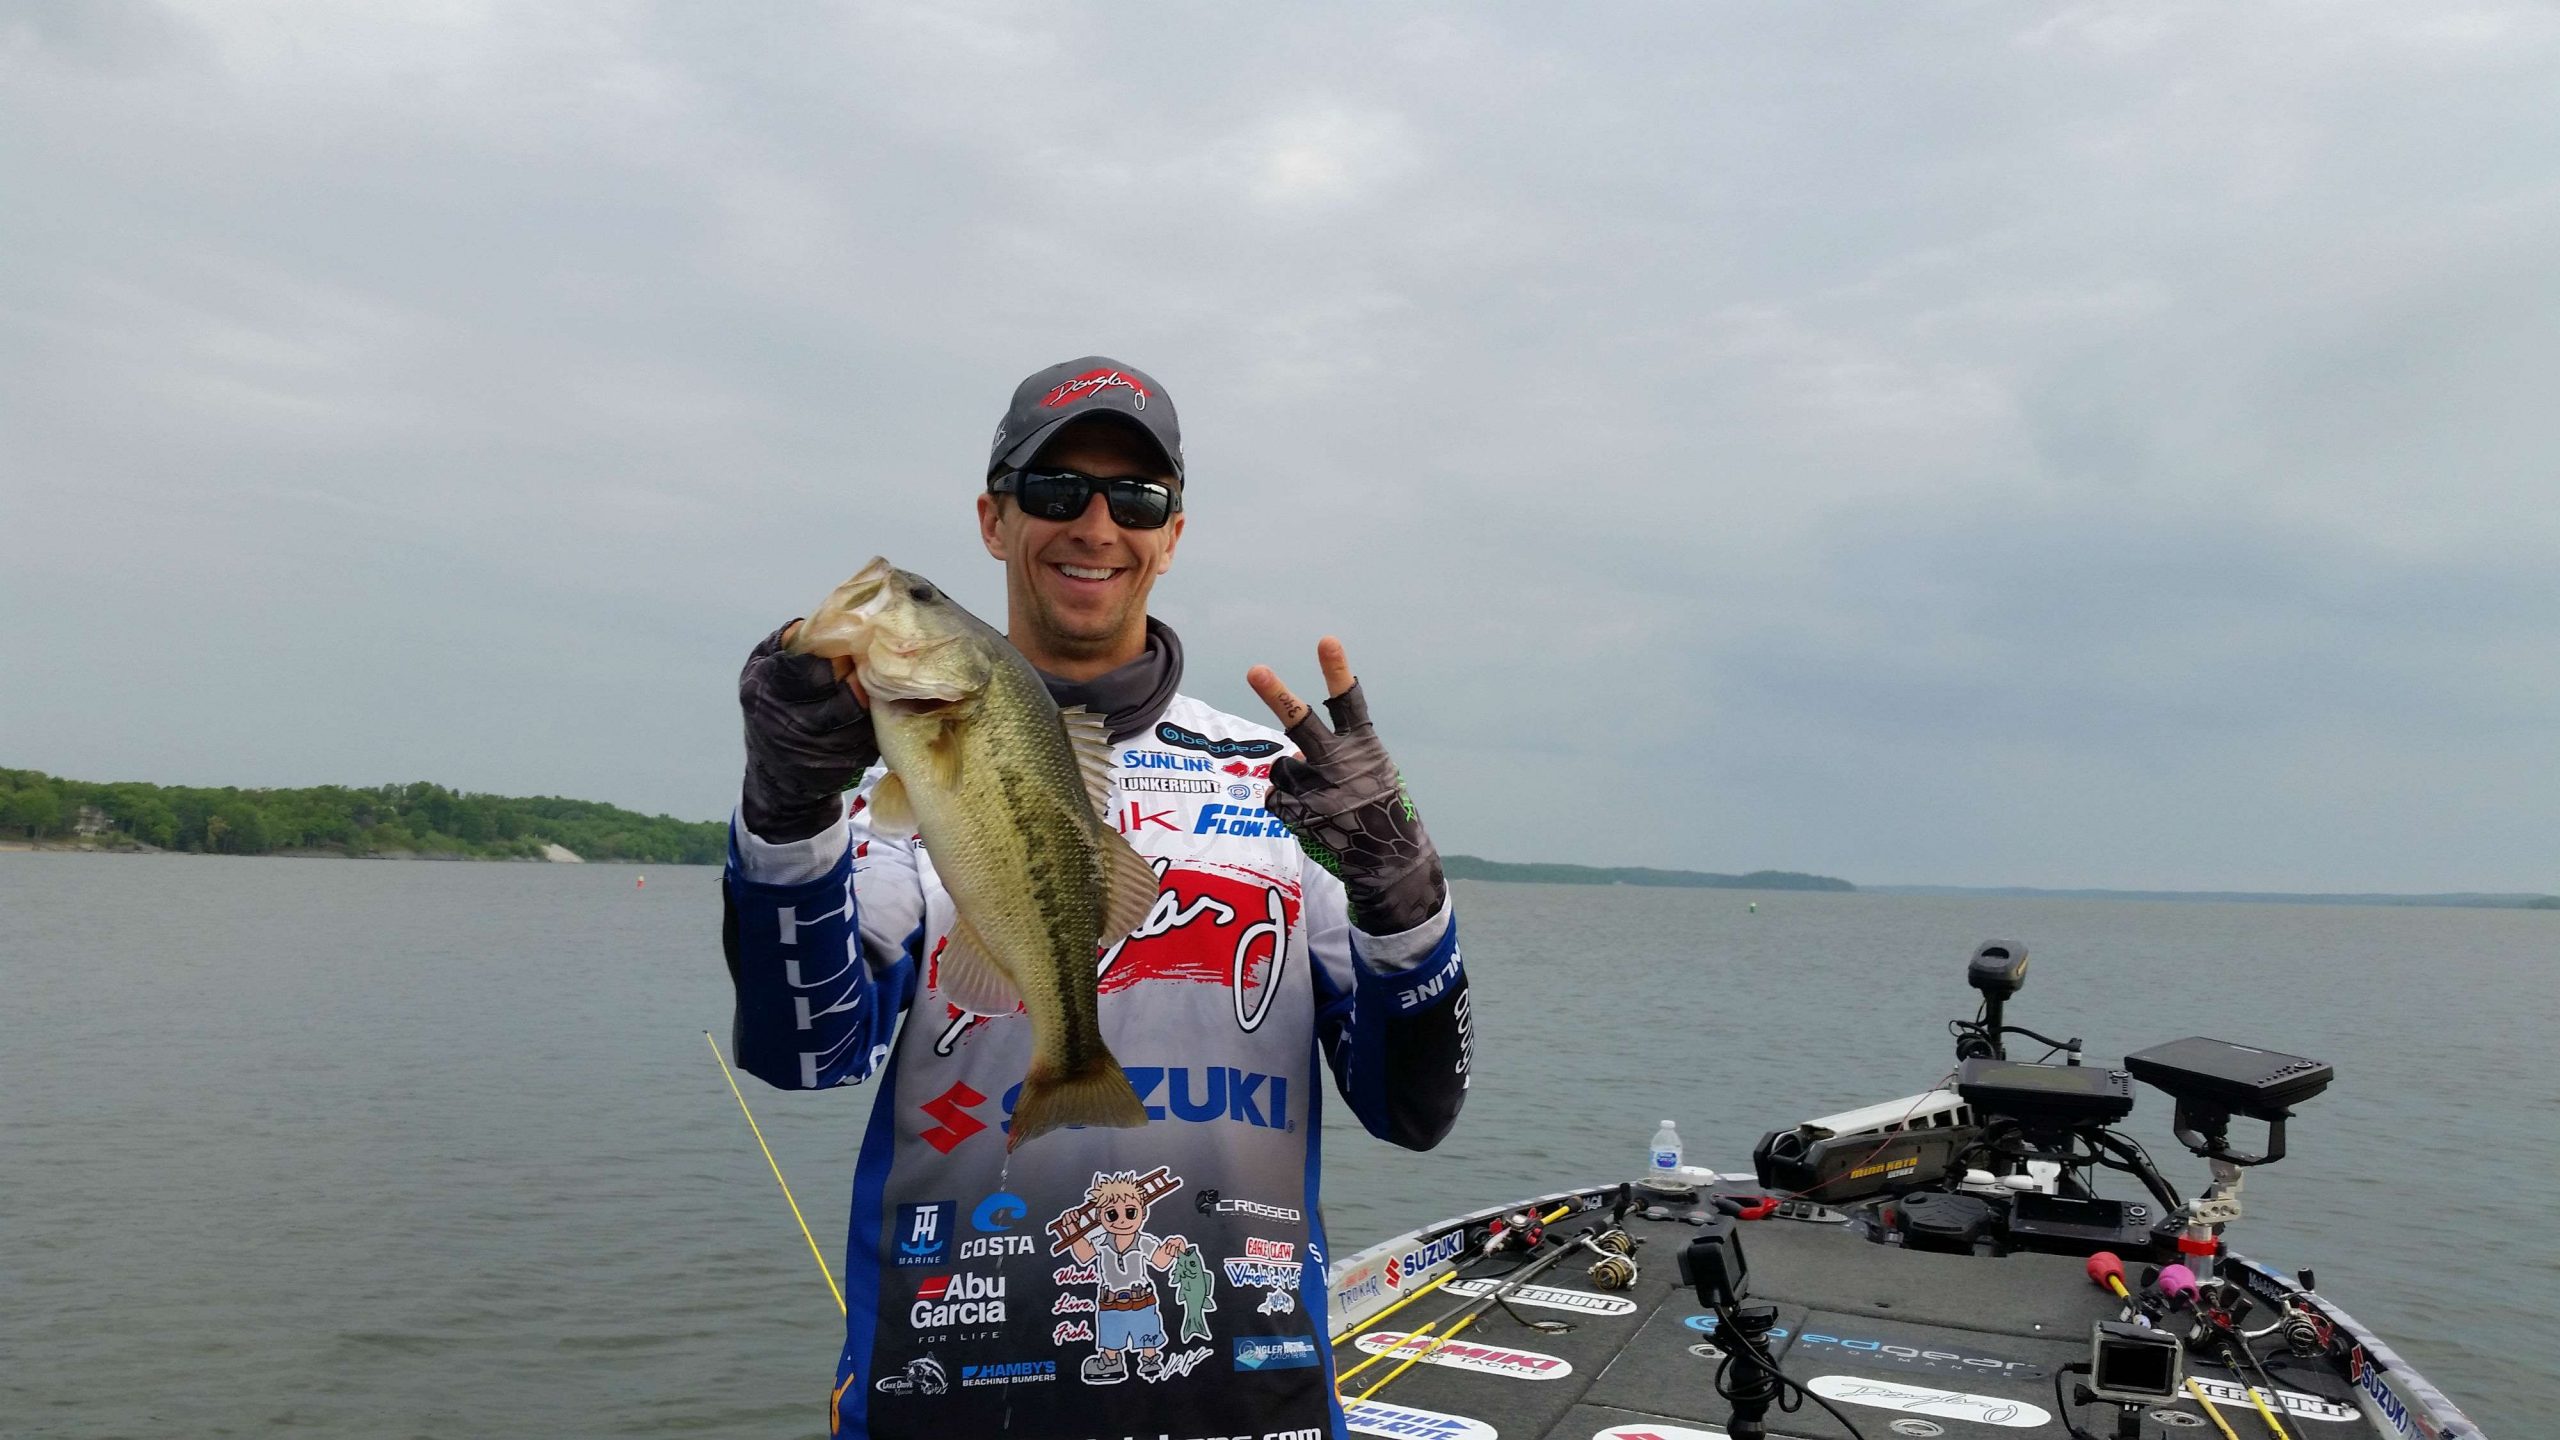 It's a keeper, but still not the size Pipkens expected. As a marshal in these tournaments,  you get to see how professionals handle things that don't go as planned. Chad Pipkens said his practice was great, but fishing is slow this morning. He's still positive about the day but hopes the bass will pick up soon.